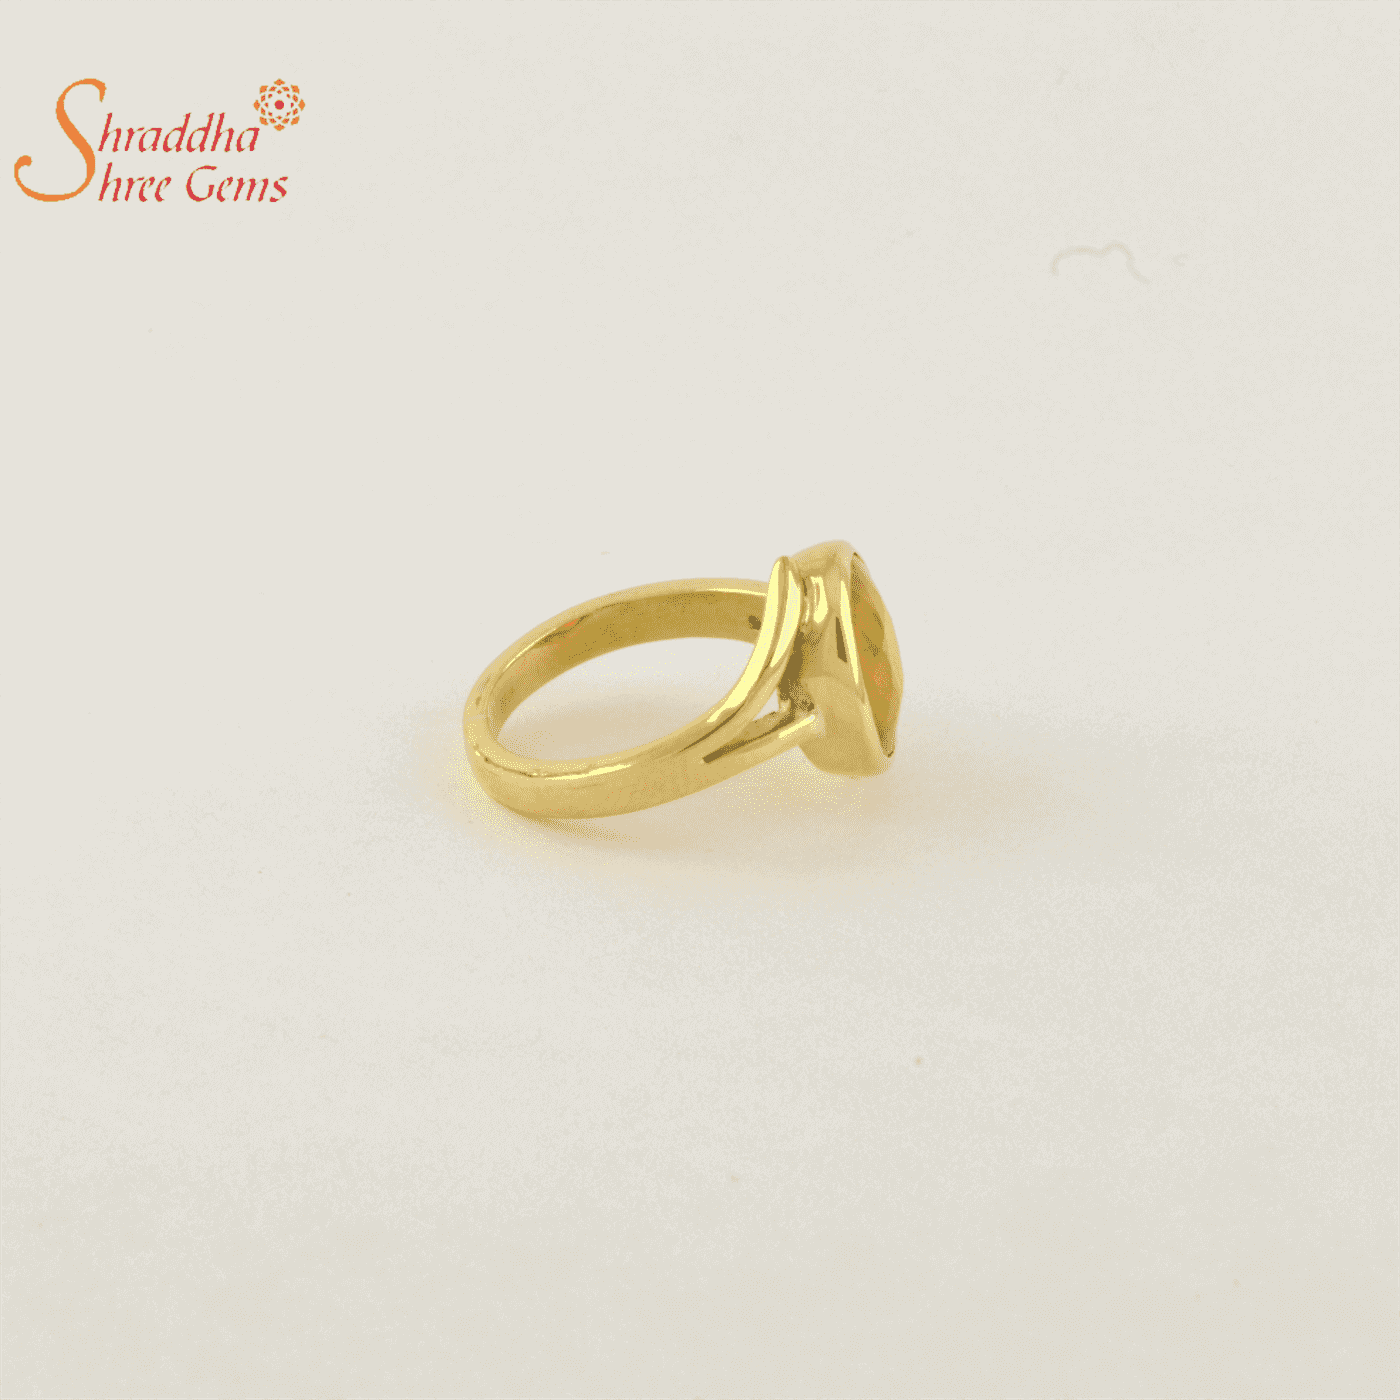 Pukhraj Ring: Original & Certified with Lab test Report. Buy Now